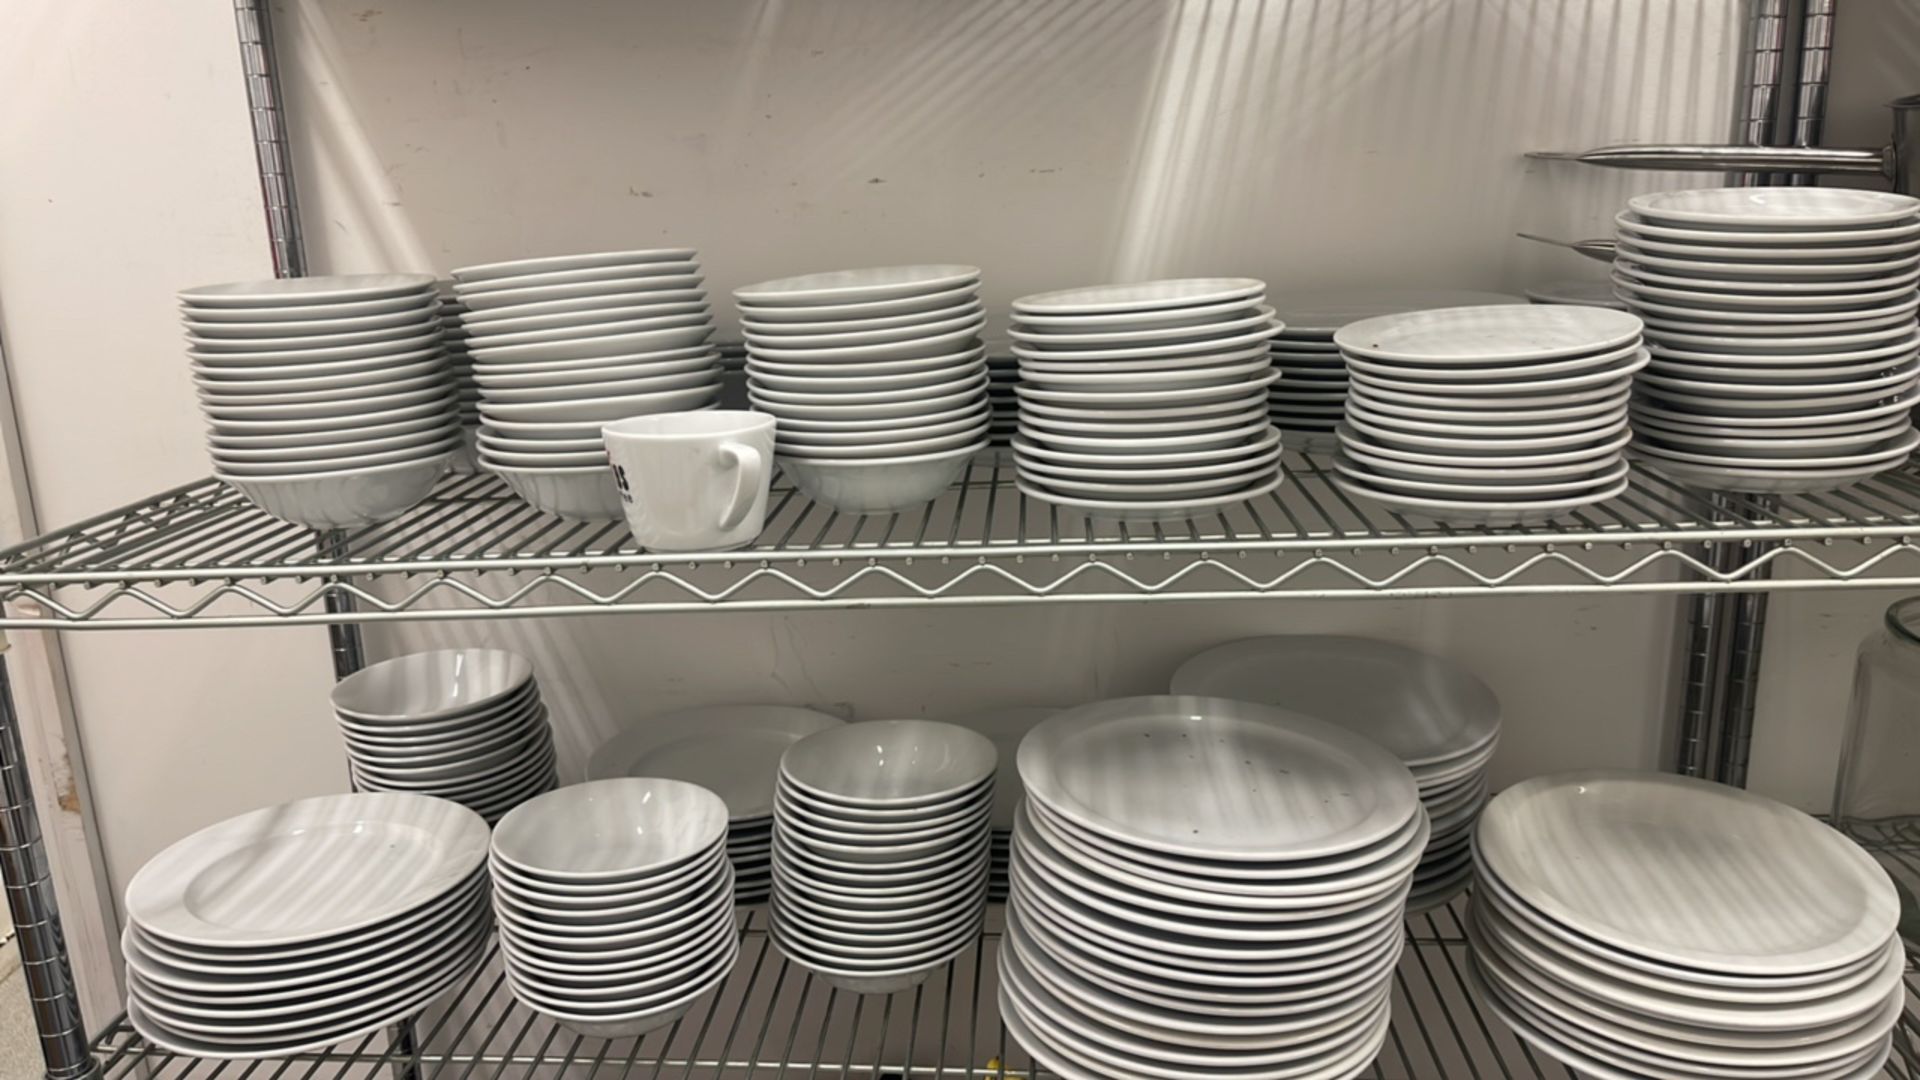 Shelving Unit With Crockery & Catering Equipment - Image 3 of 4